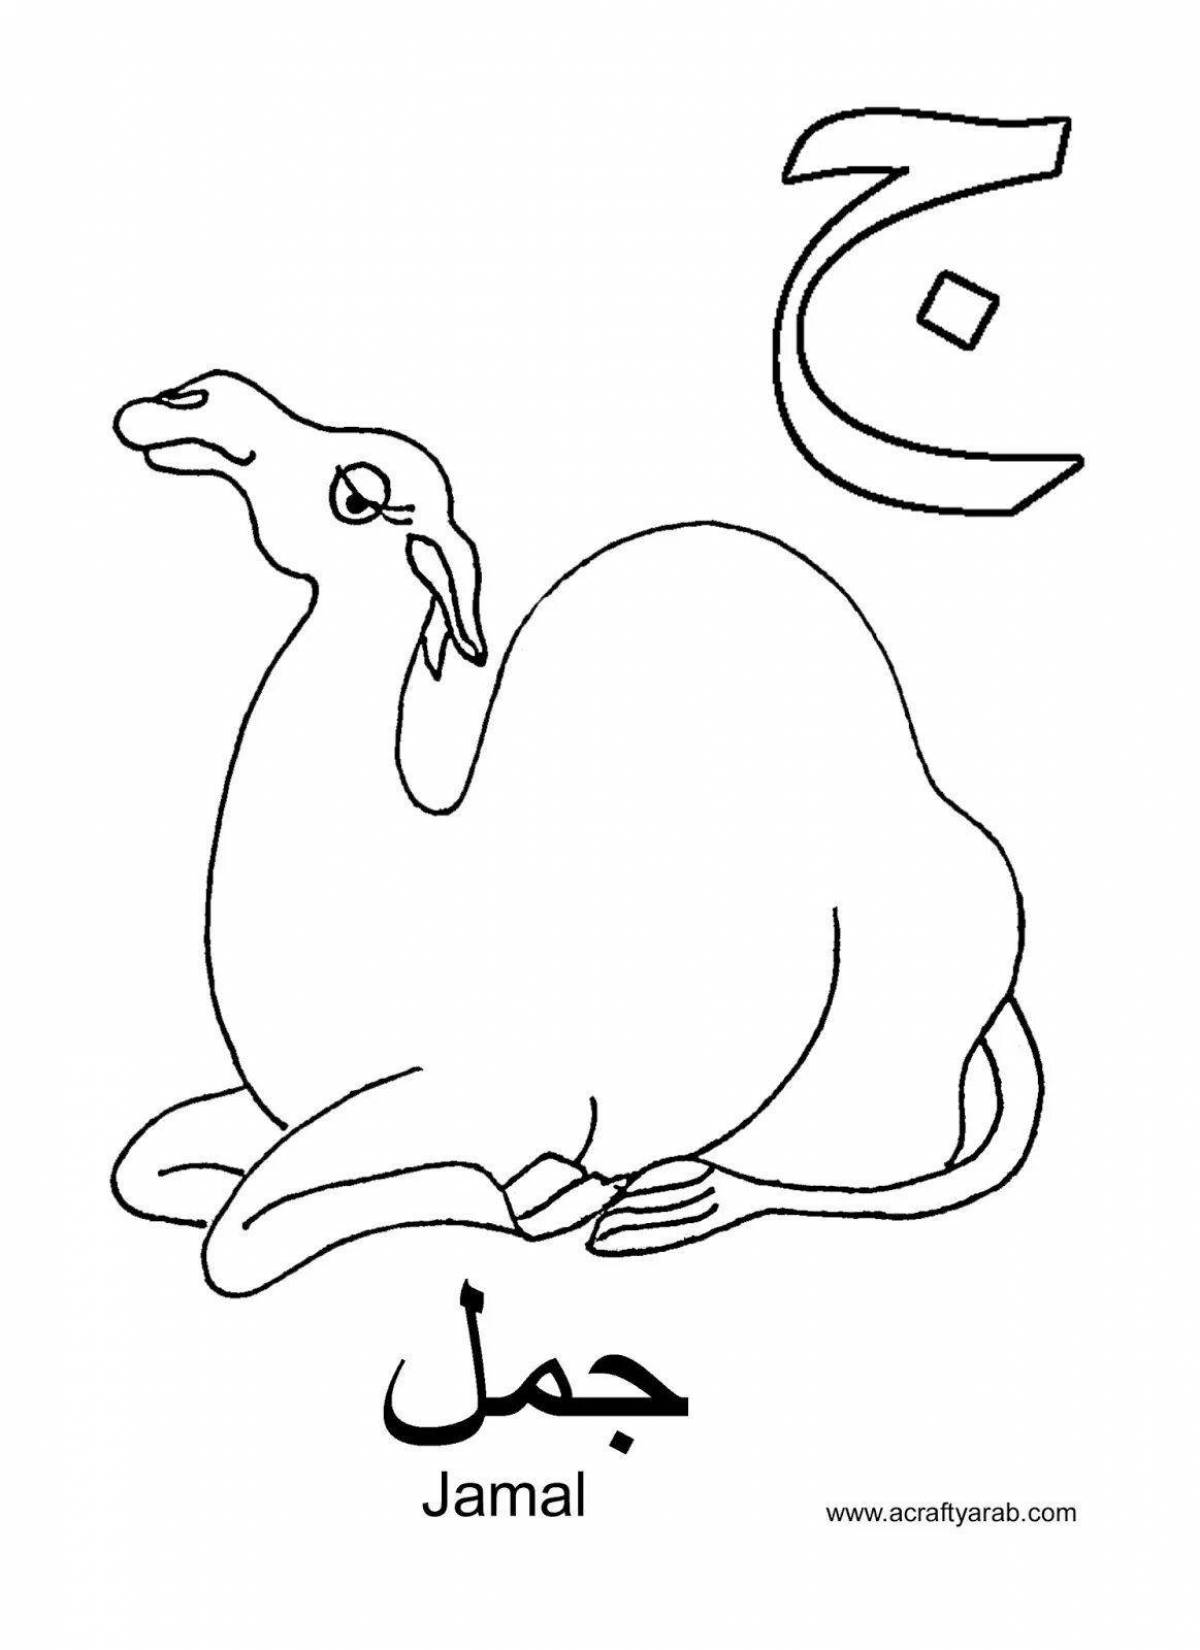 Colorful arabic alphabet coloring page for kids of all cultures